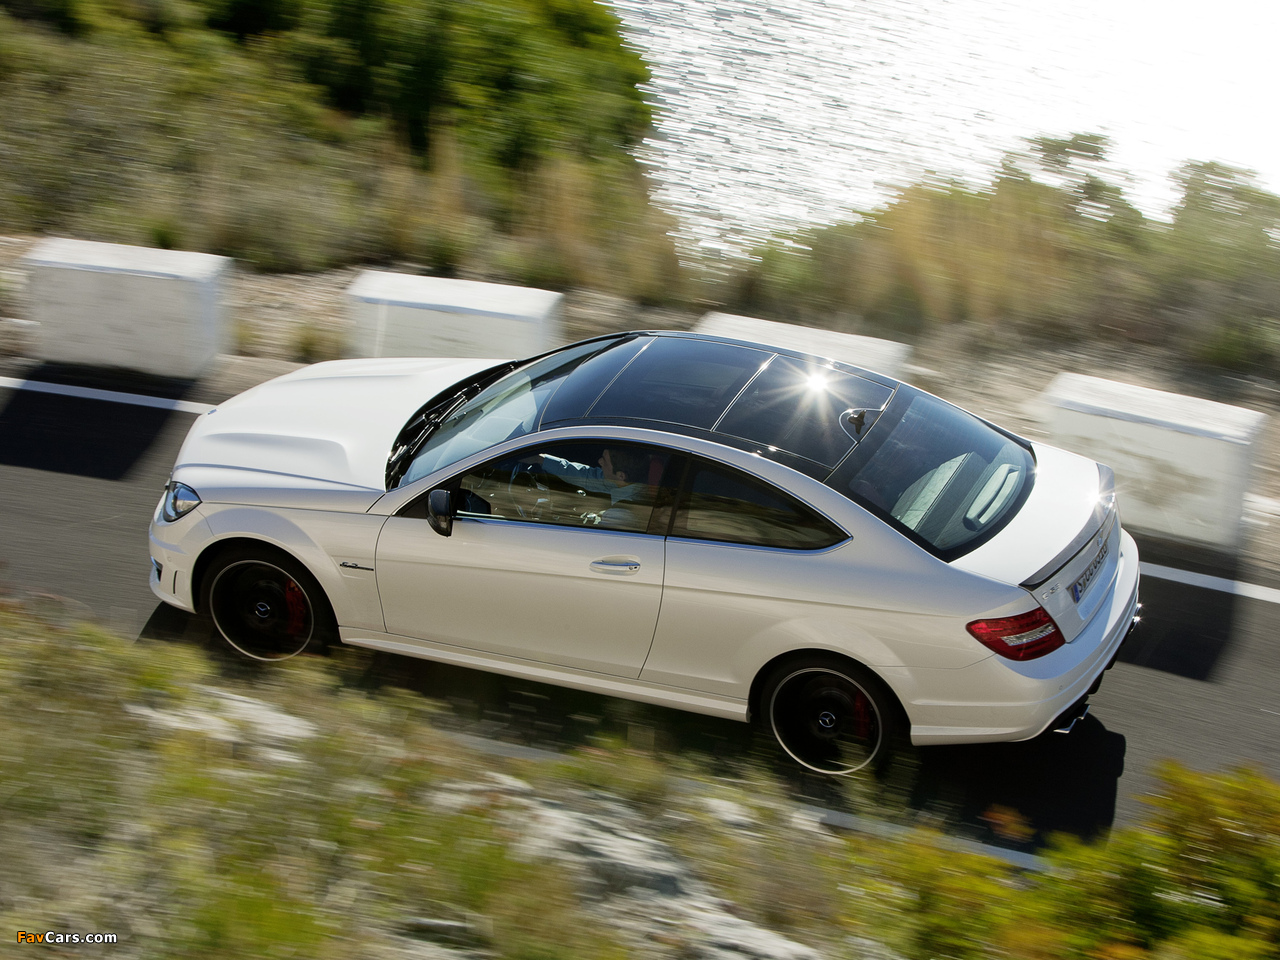 Mercedes-Benz C 63 AMG Coupe (C204) 2011 pictures (1280 x 960)